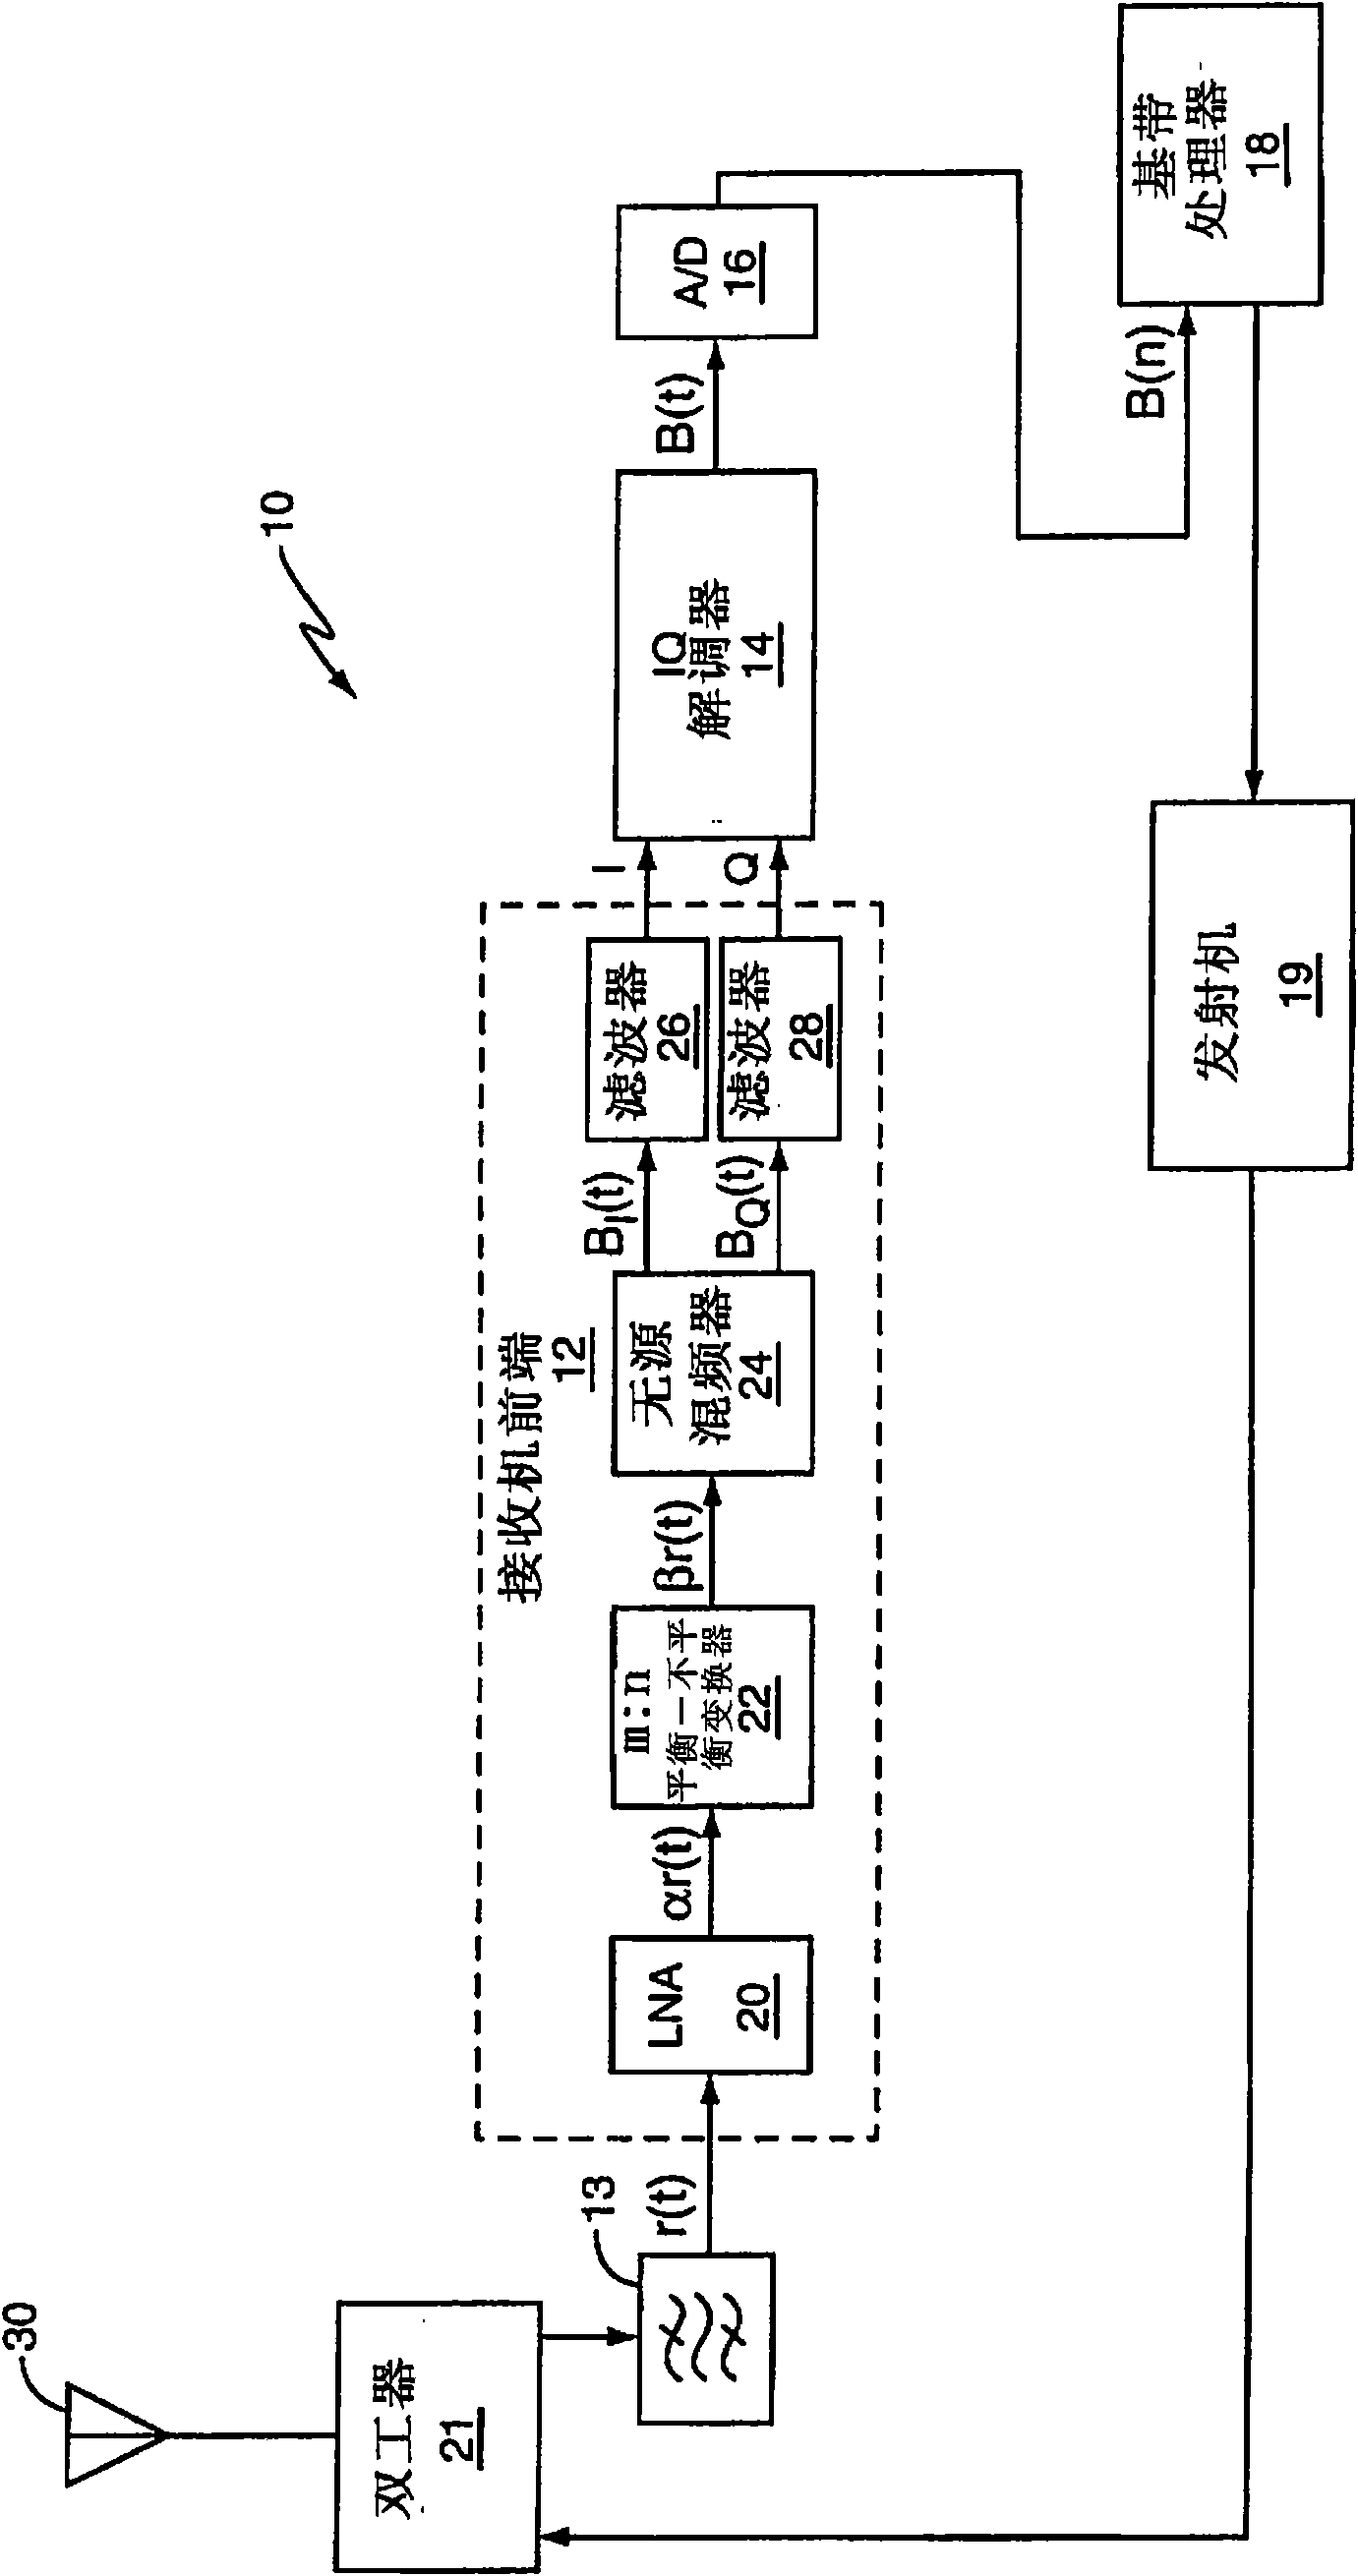 Method and apparatus for receiving radio frequency signals